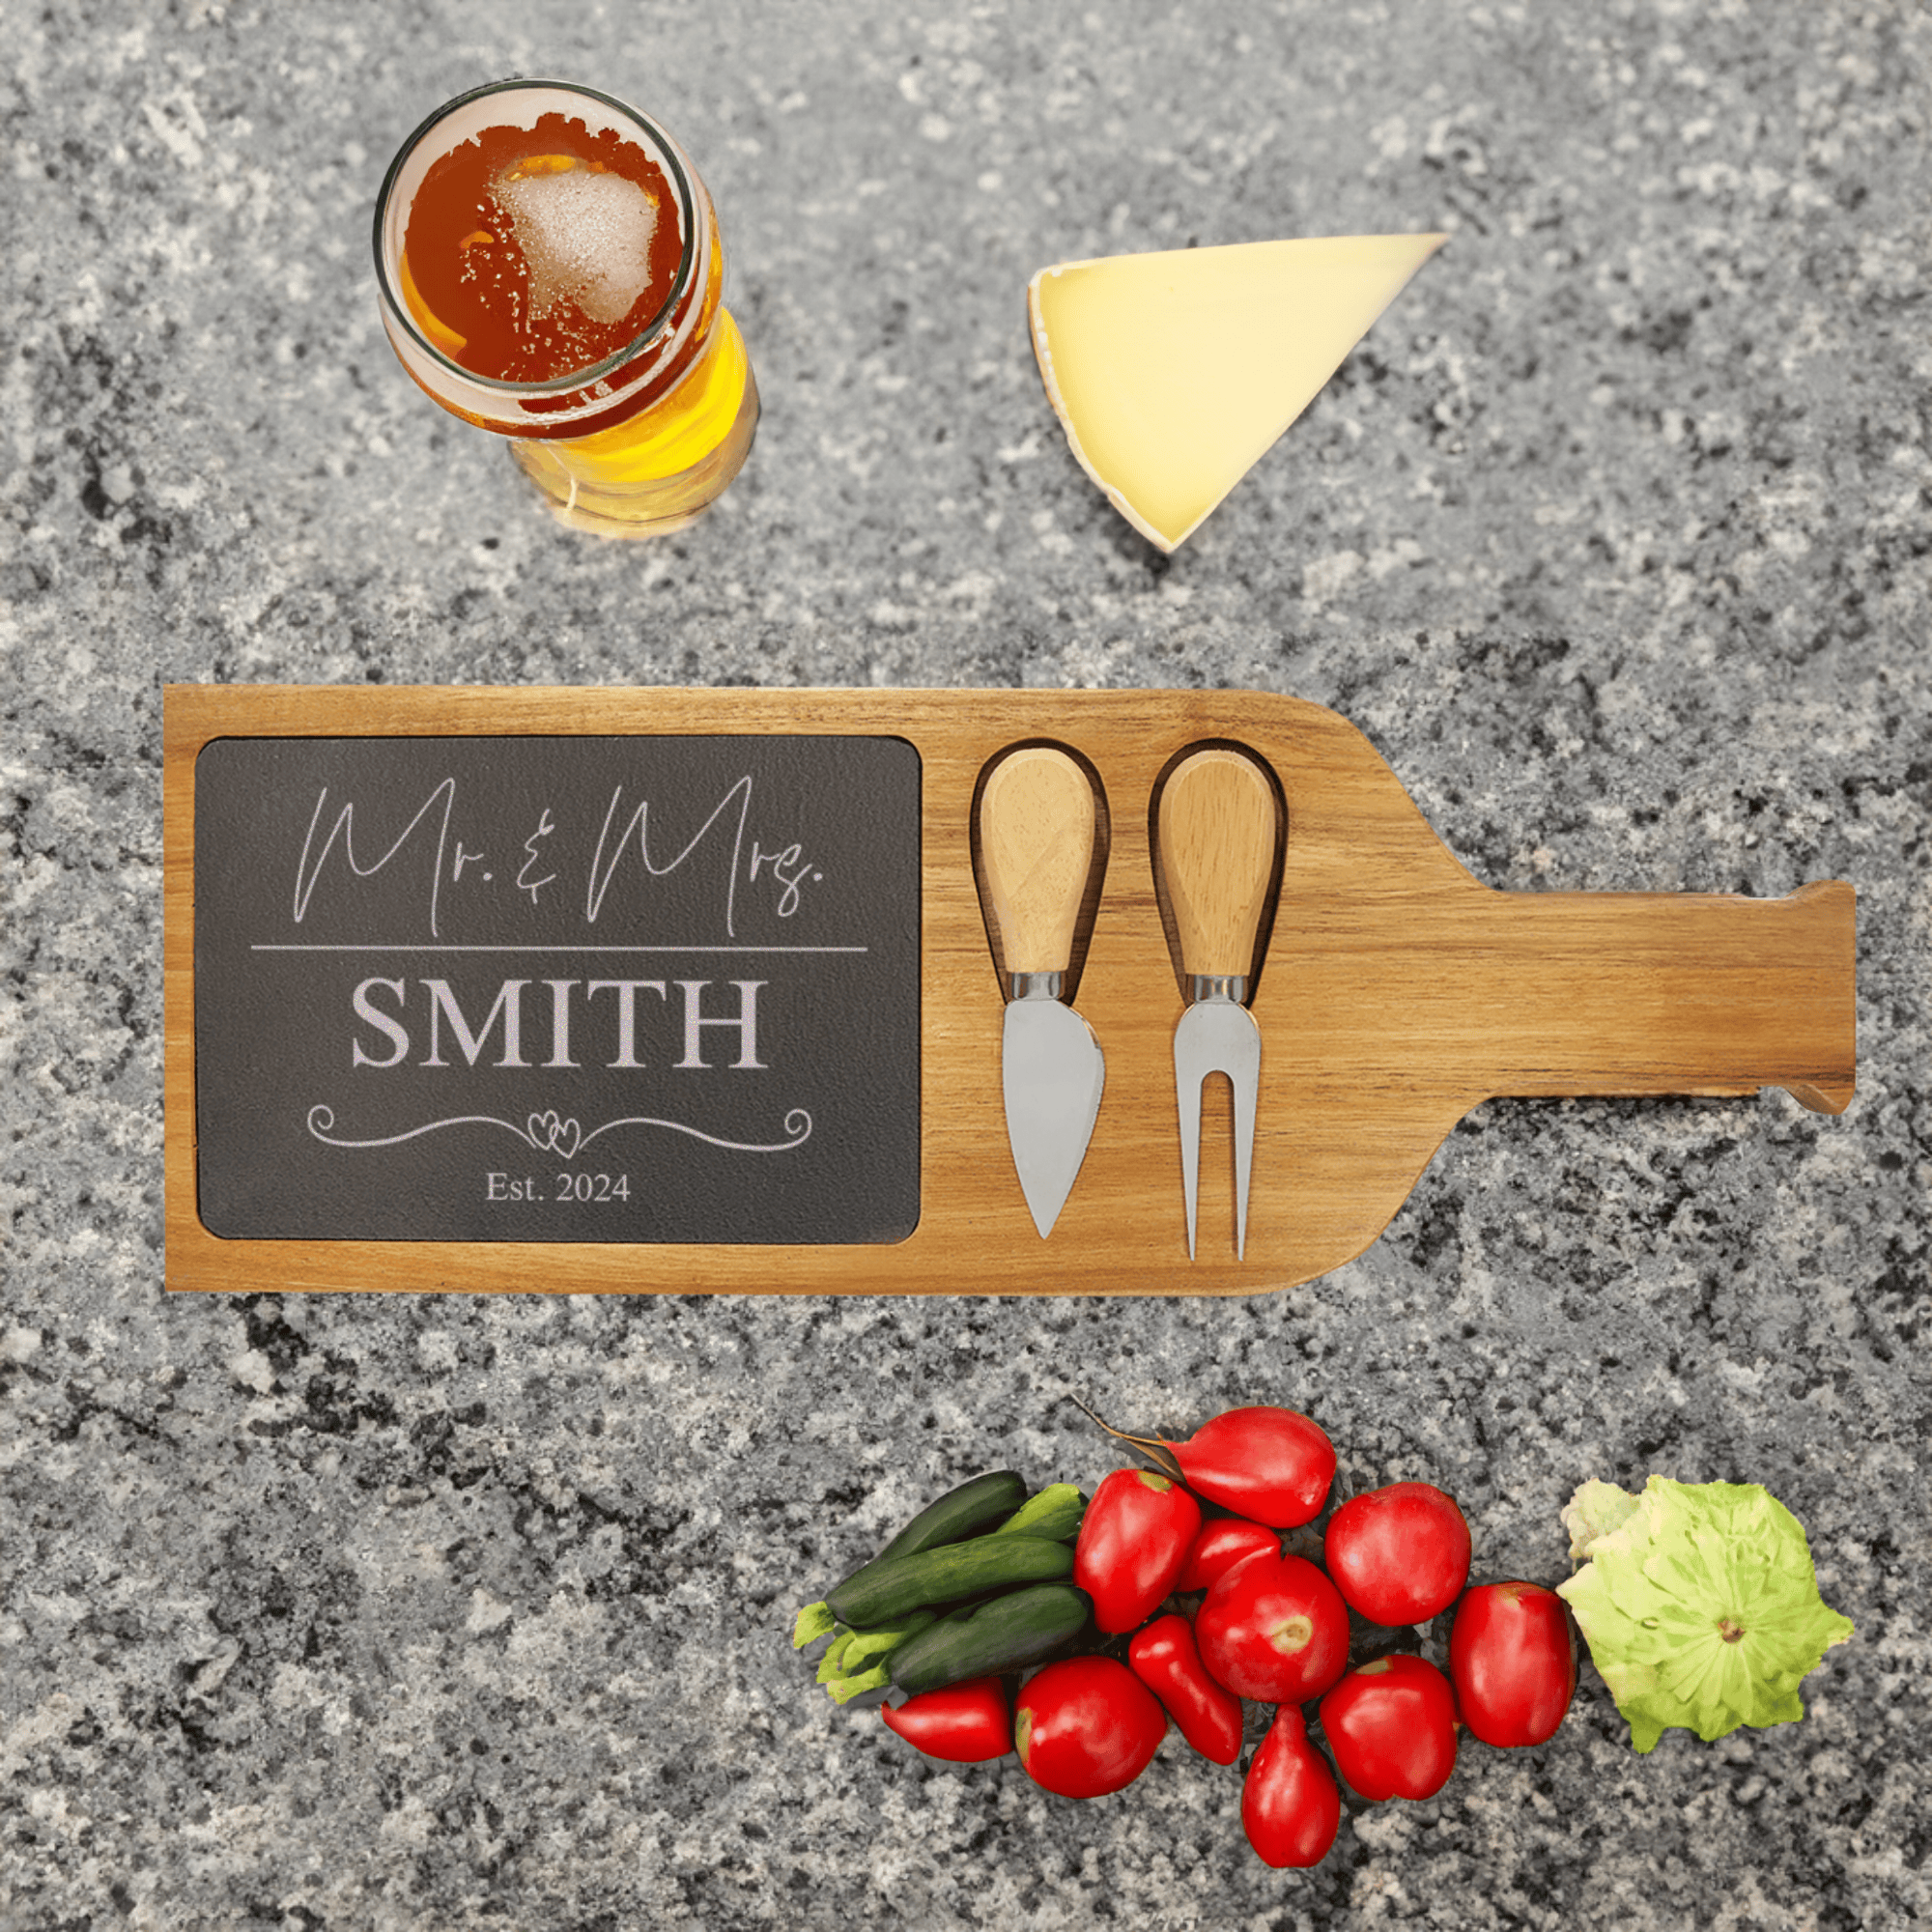 Shared Journey Wood Slate Serving Tray With Handle